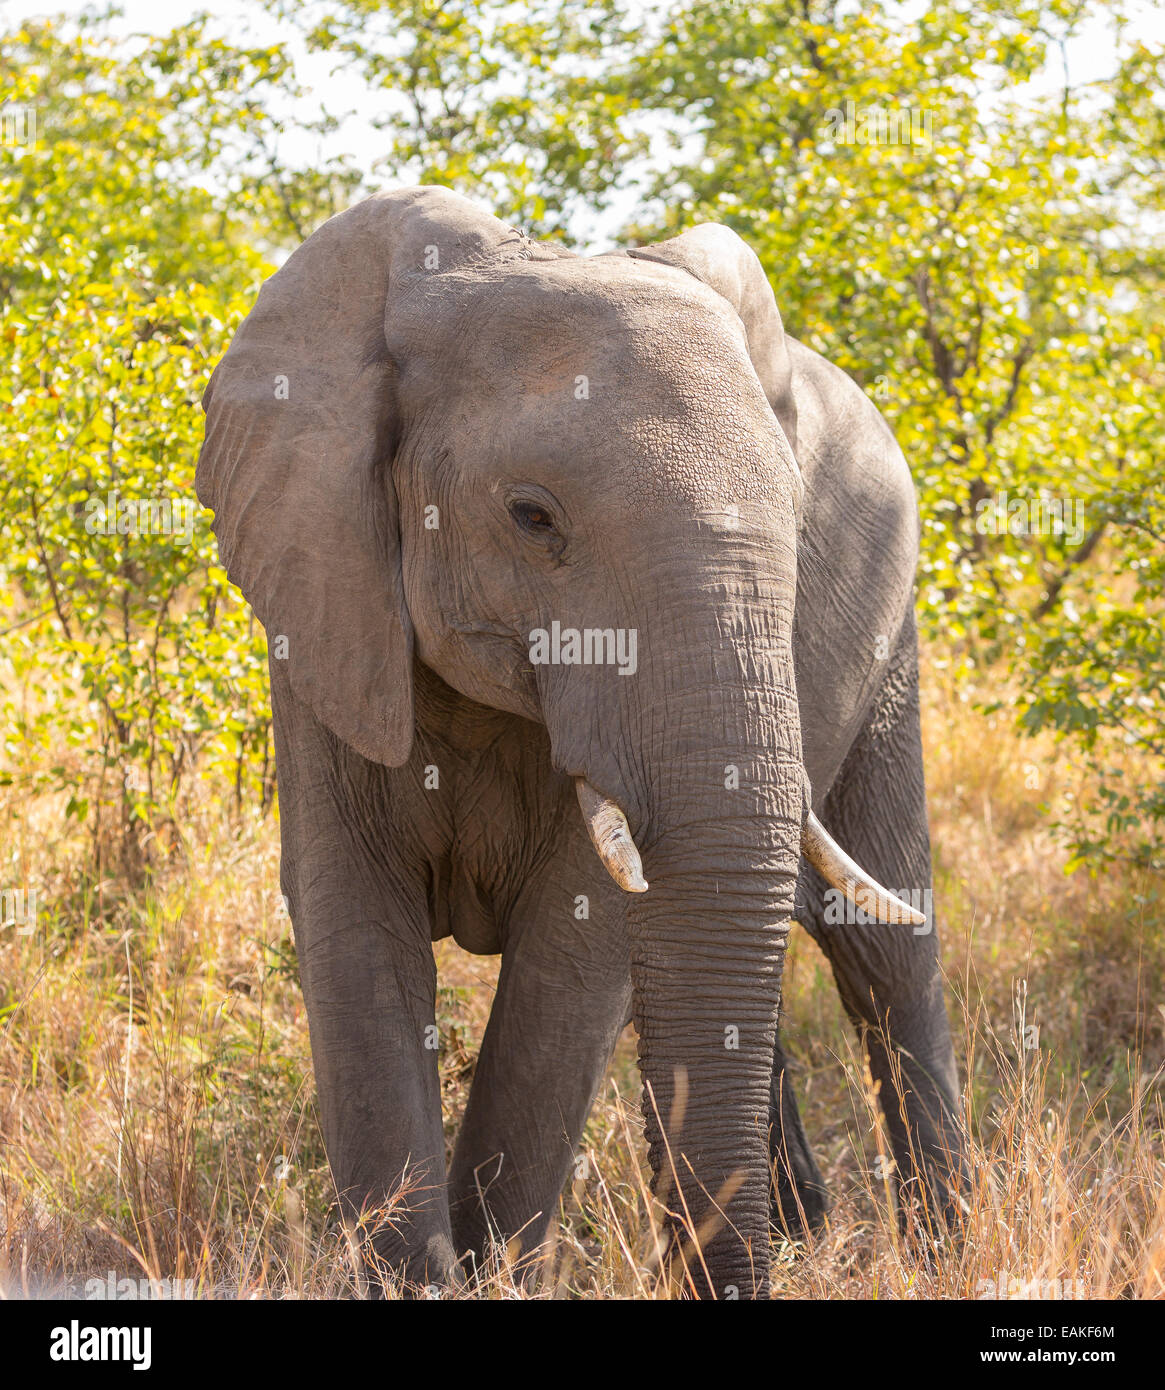 KRUGER NATIONAL PARK, SOUTH AFRICA - African Elephant. Stock Photo